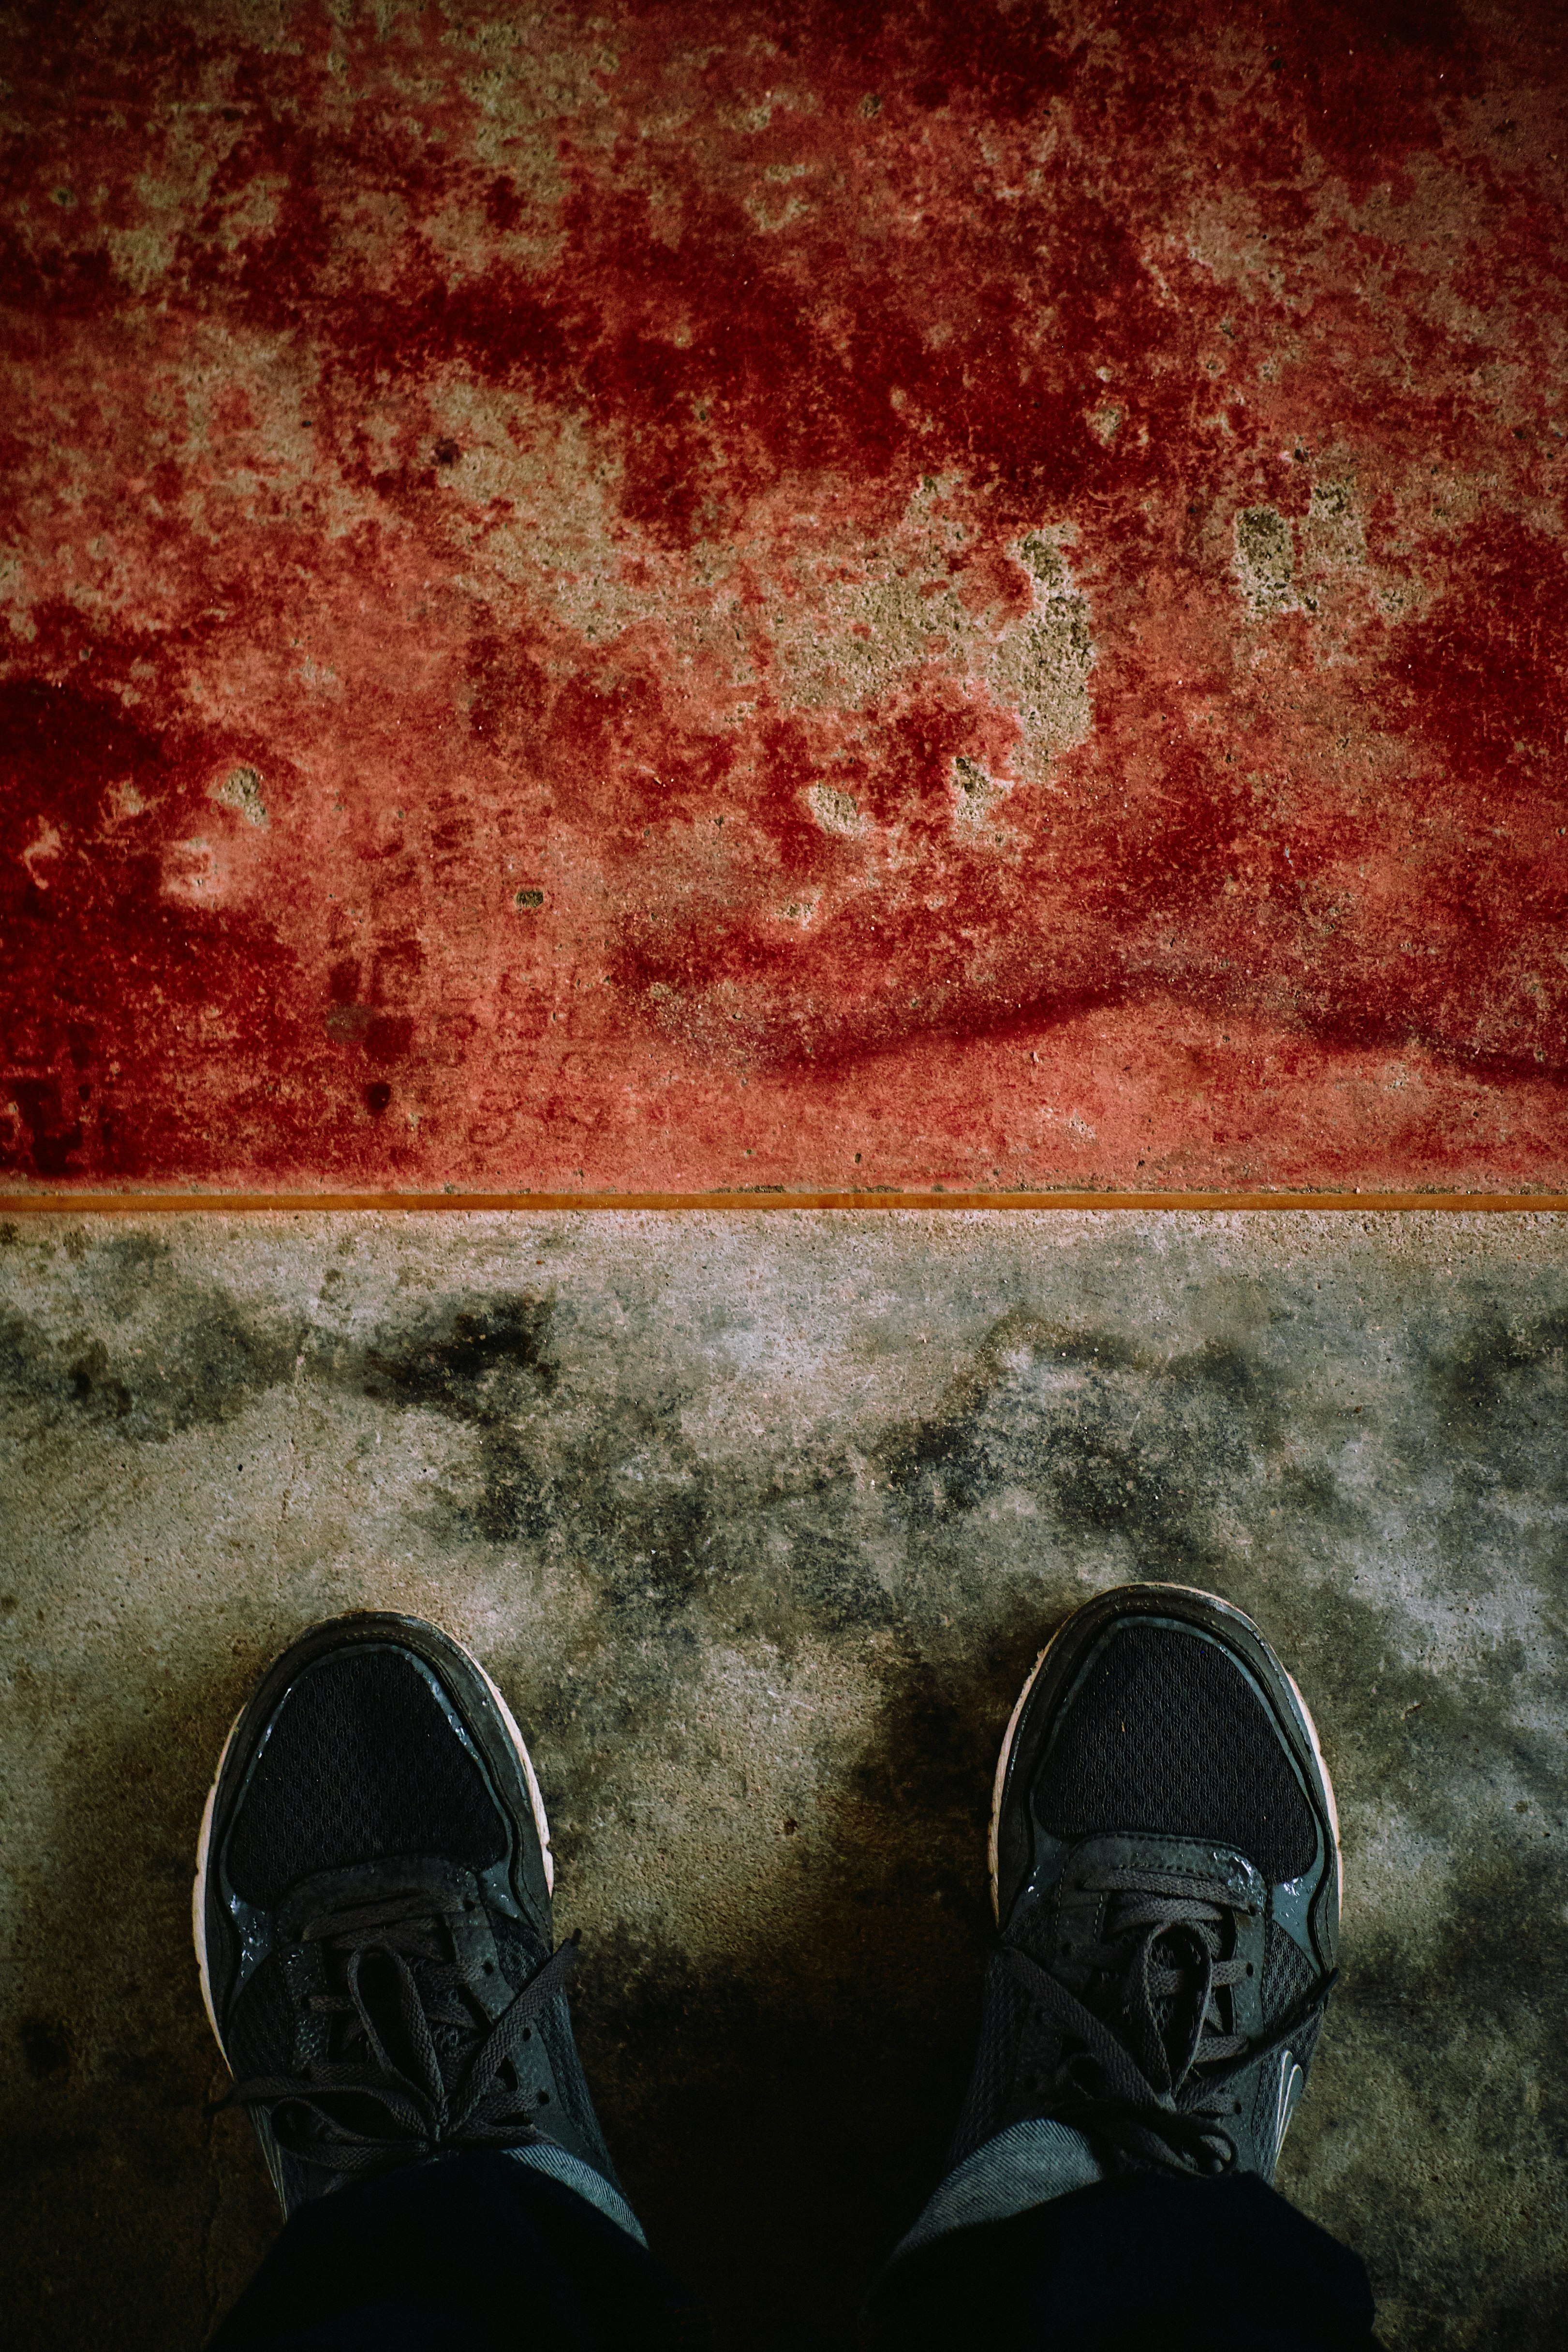 black and white sneakers on red and white area rug